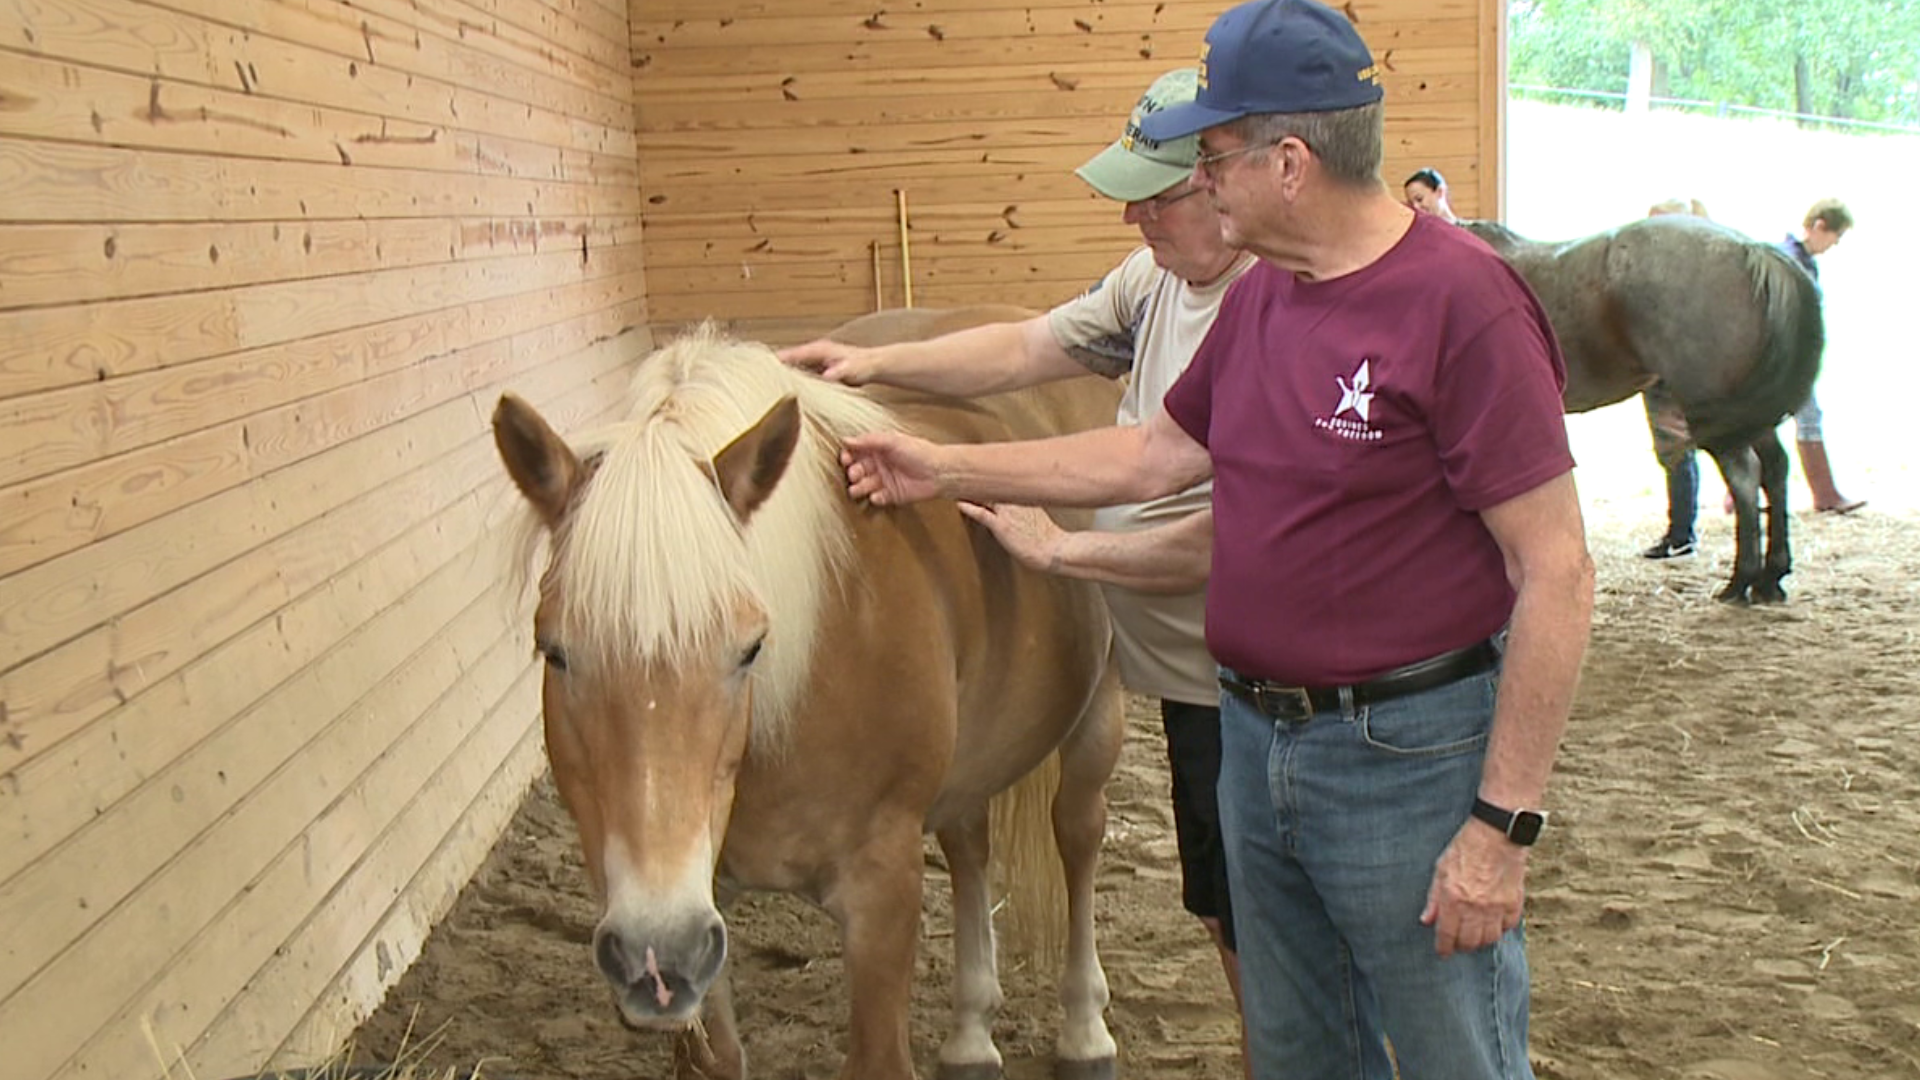 The horses and humans will be here Sunday from 1 p.m. to 3 p.m. for all veterans who need help.